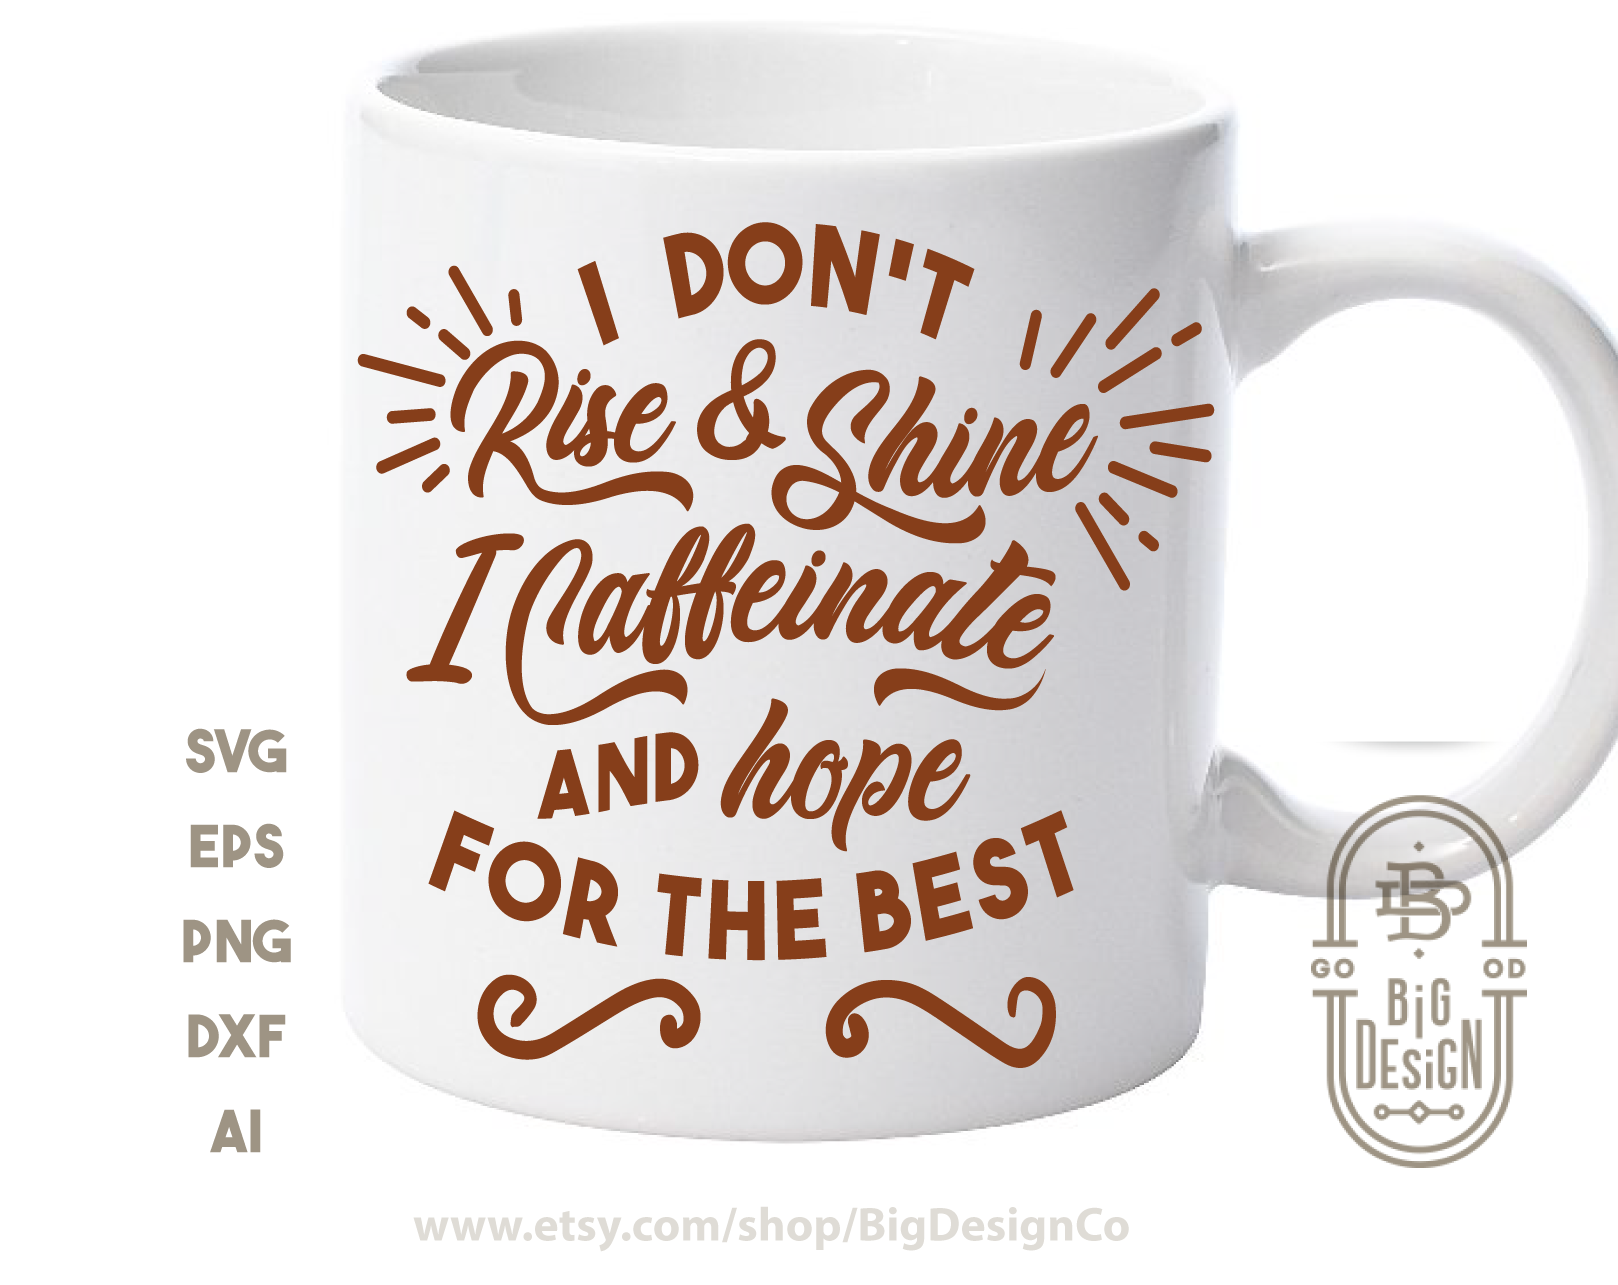 Download Coffee Svg I Don T Rise And Shine I Caffeinate And Hope For The Best Design Shopy